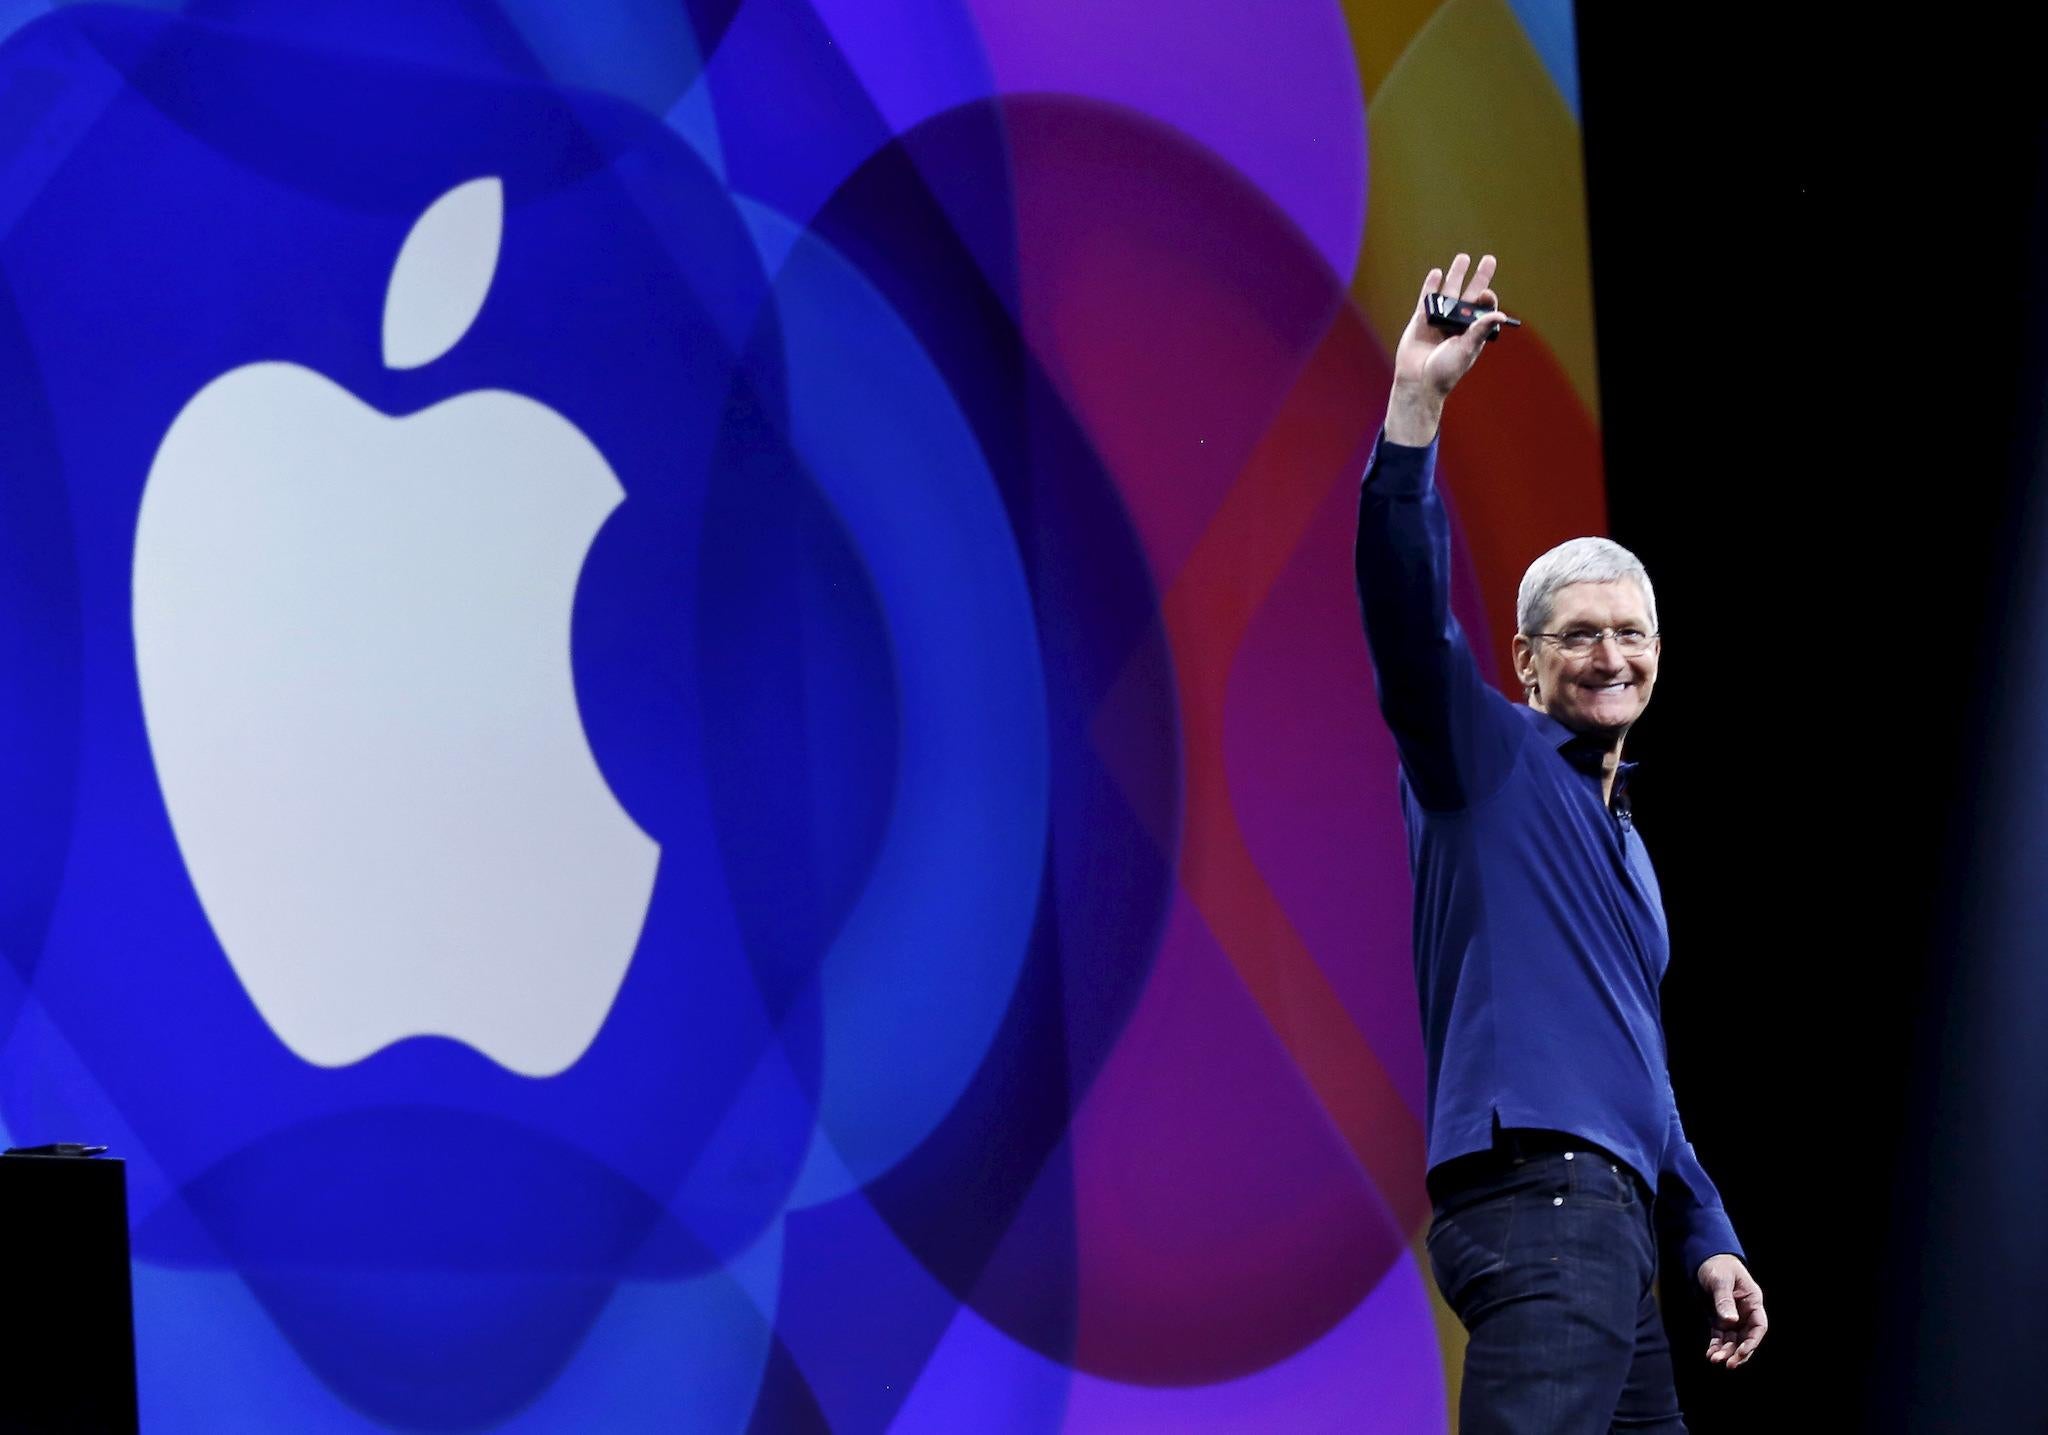 Apple has topped a list of thwe top 100 most valuable brands